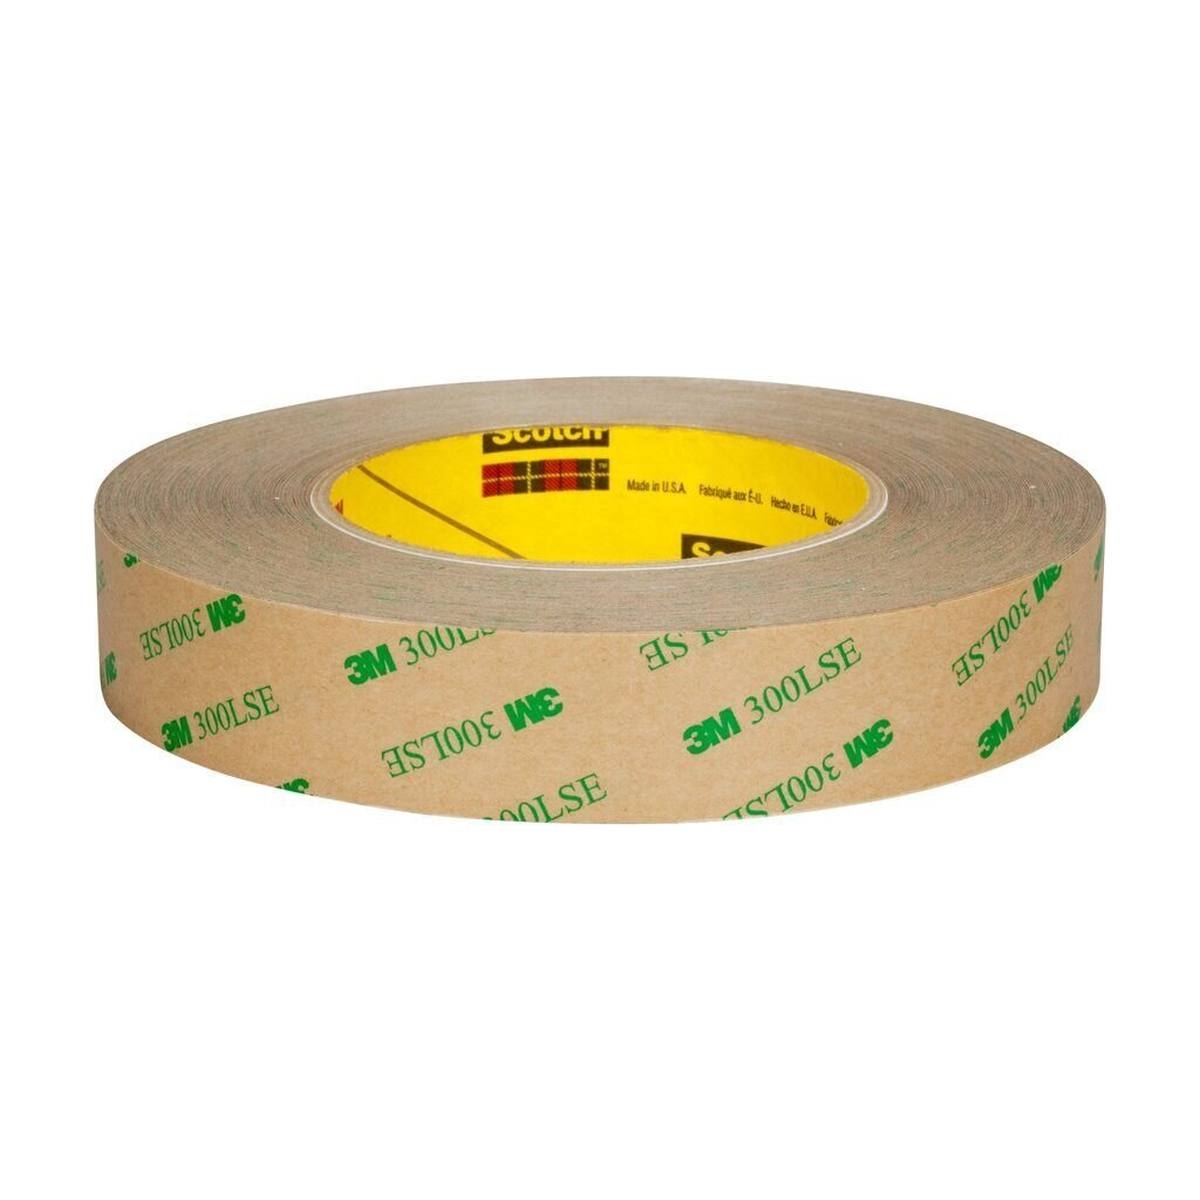 3M Dubbelzijdig plakband met polyester drager 93020LE, transparant, 50 mm x 55 m, 0,20 mm